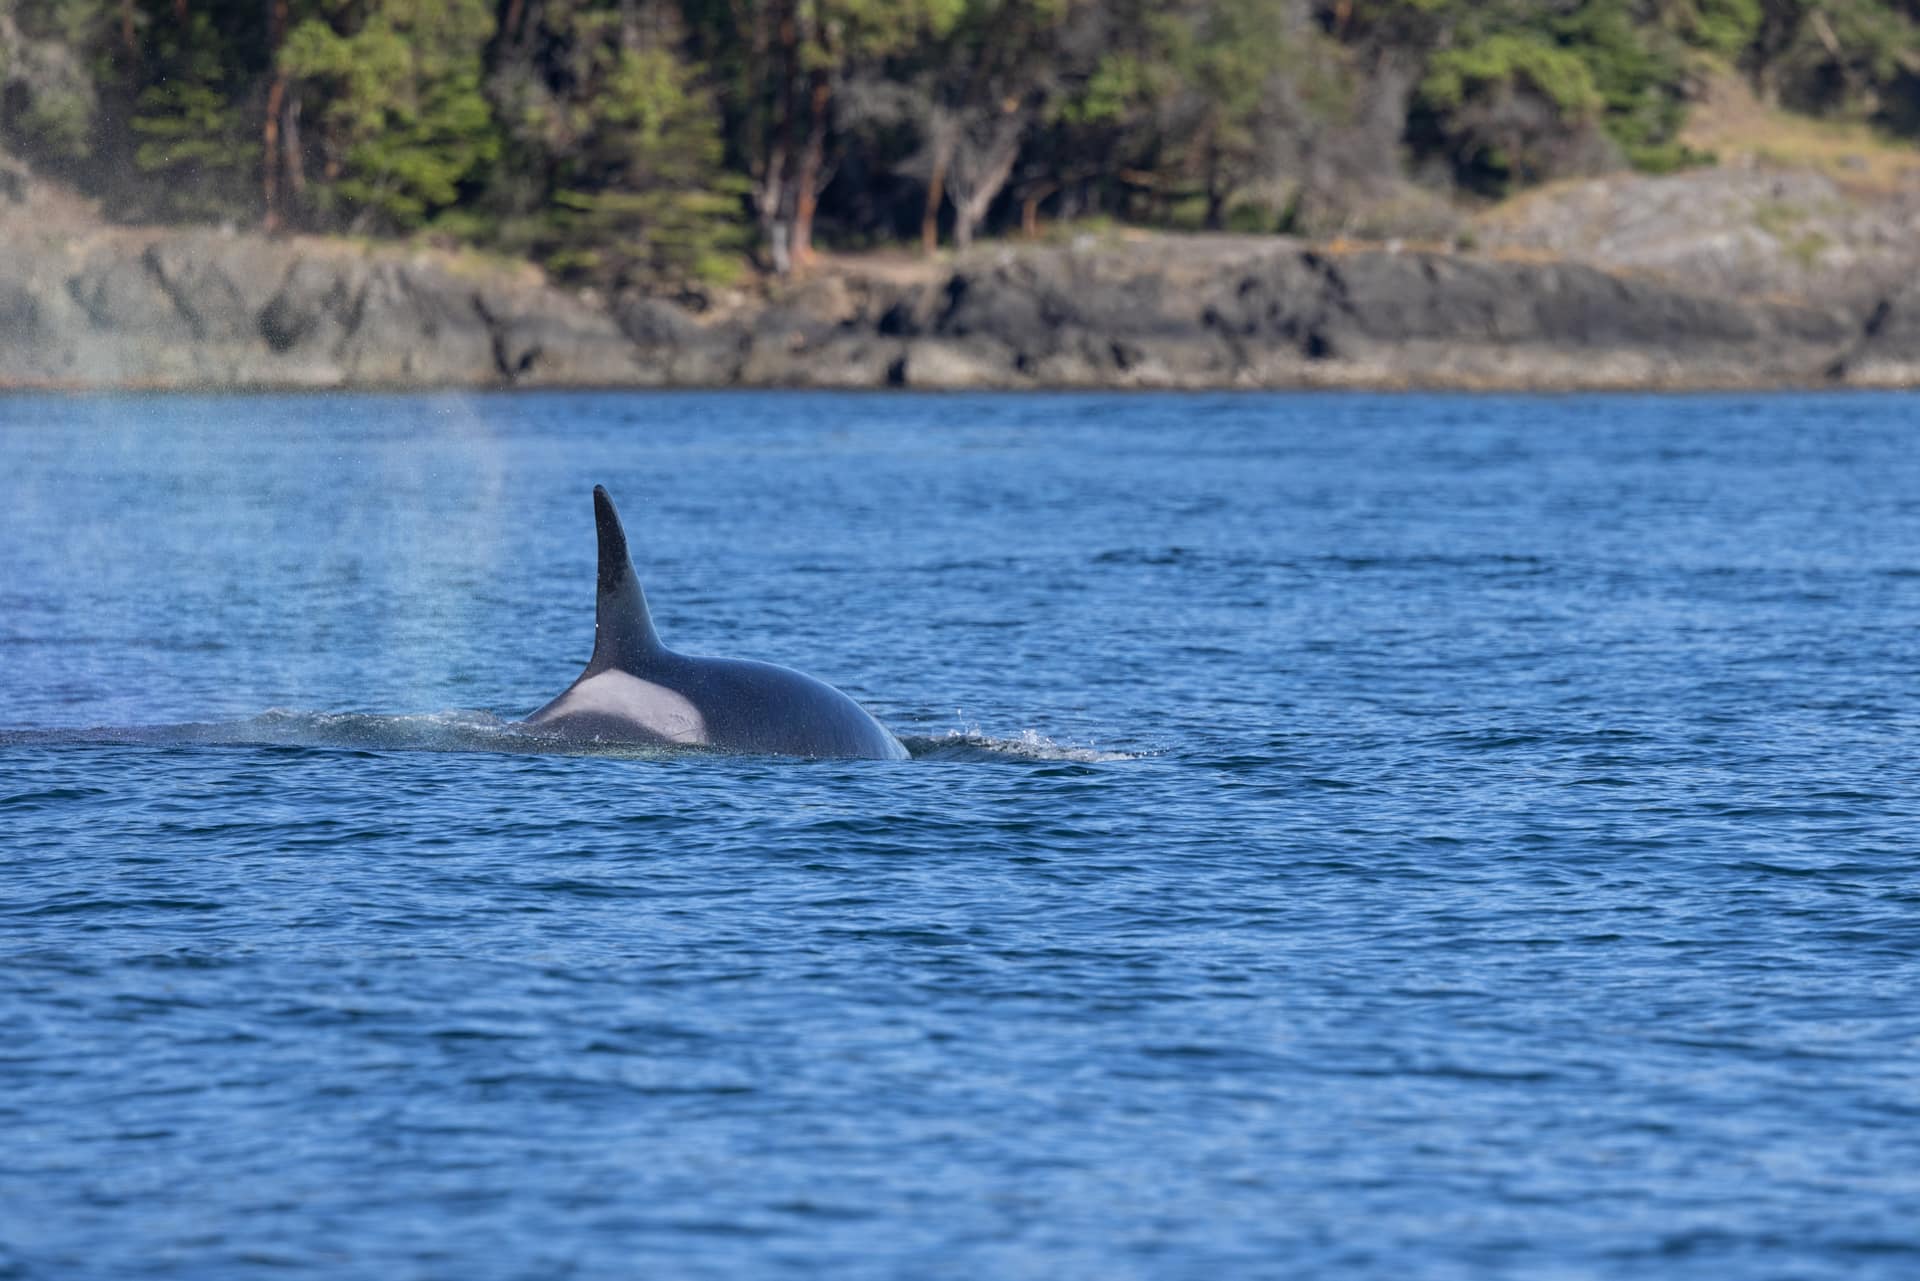 A Southern Resident killer whale begins to dive while foraging.